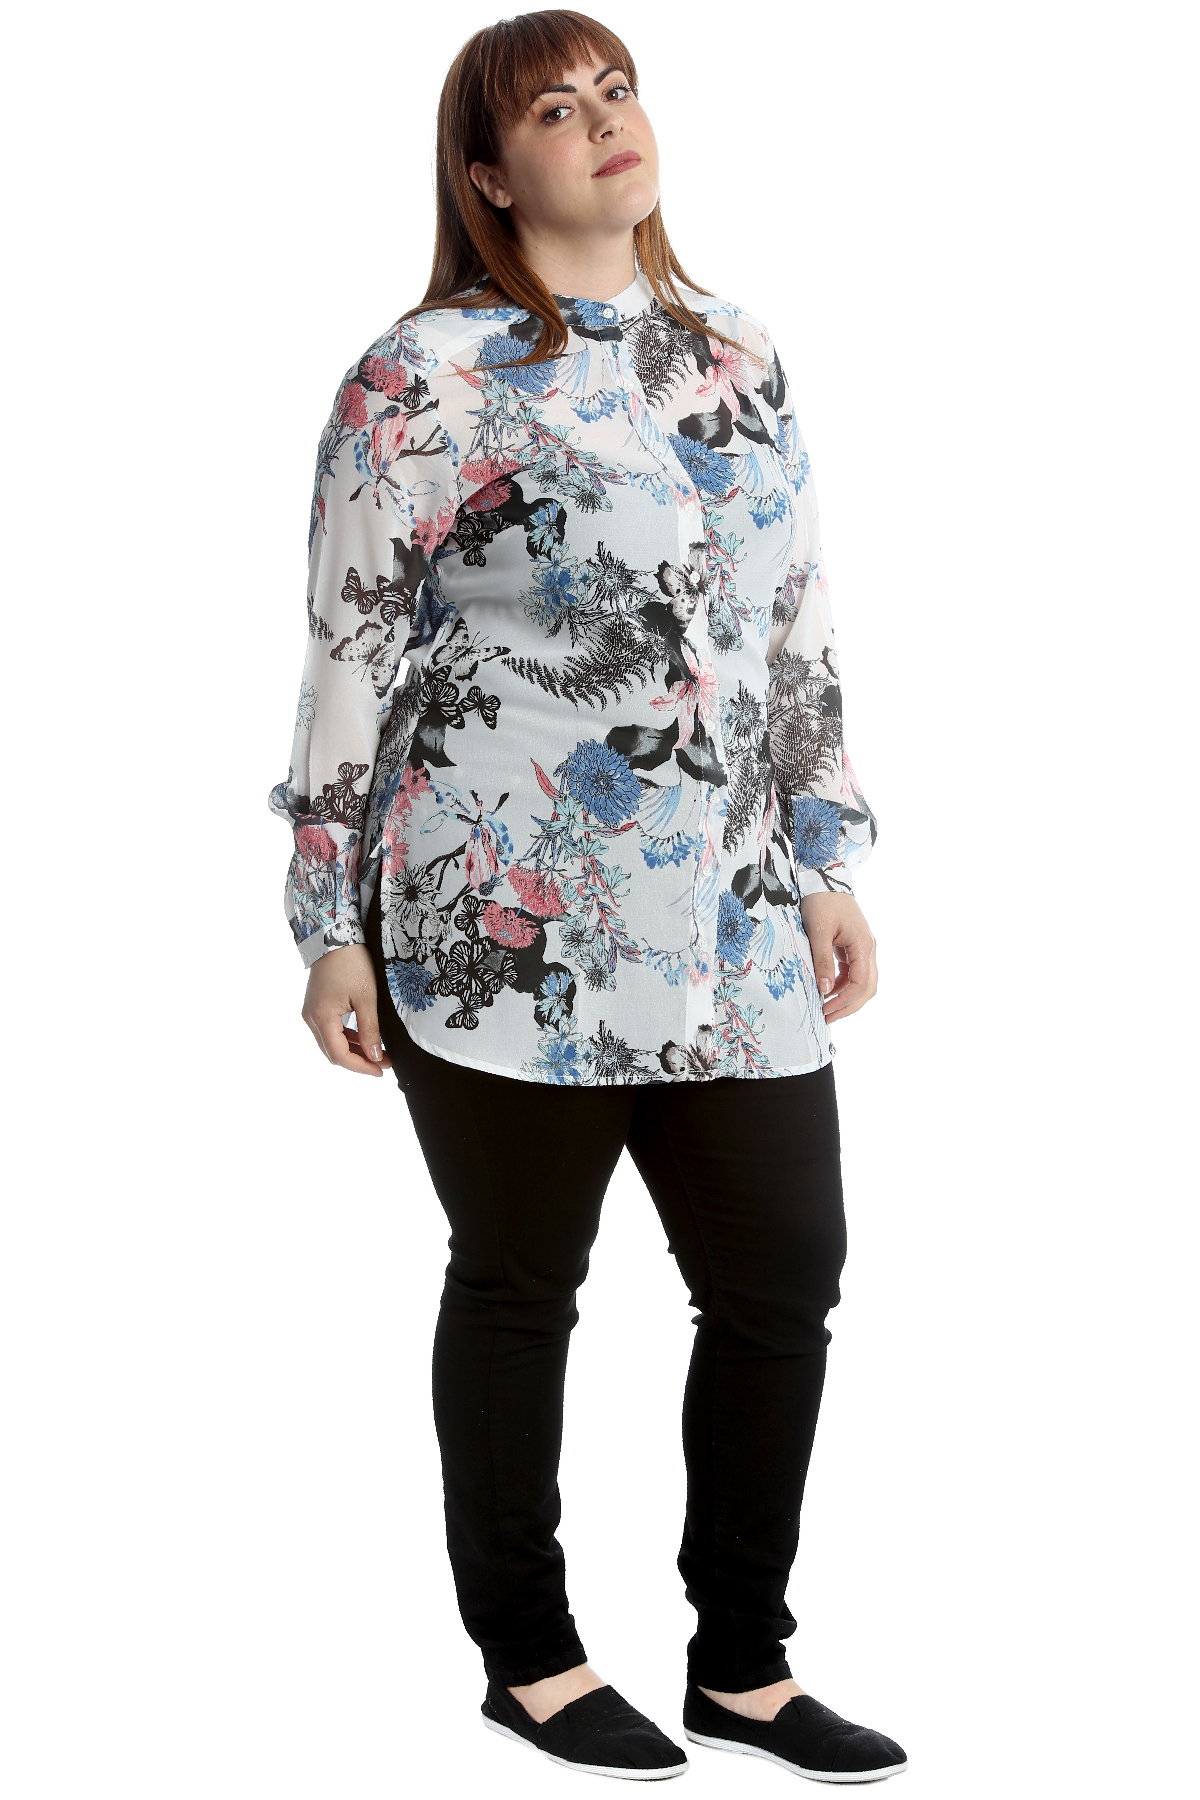 New Womens Plus Size Shirt Ladies Floral Butterfly Top Button Long Sleeves Ban